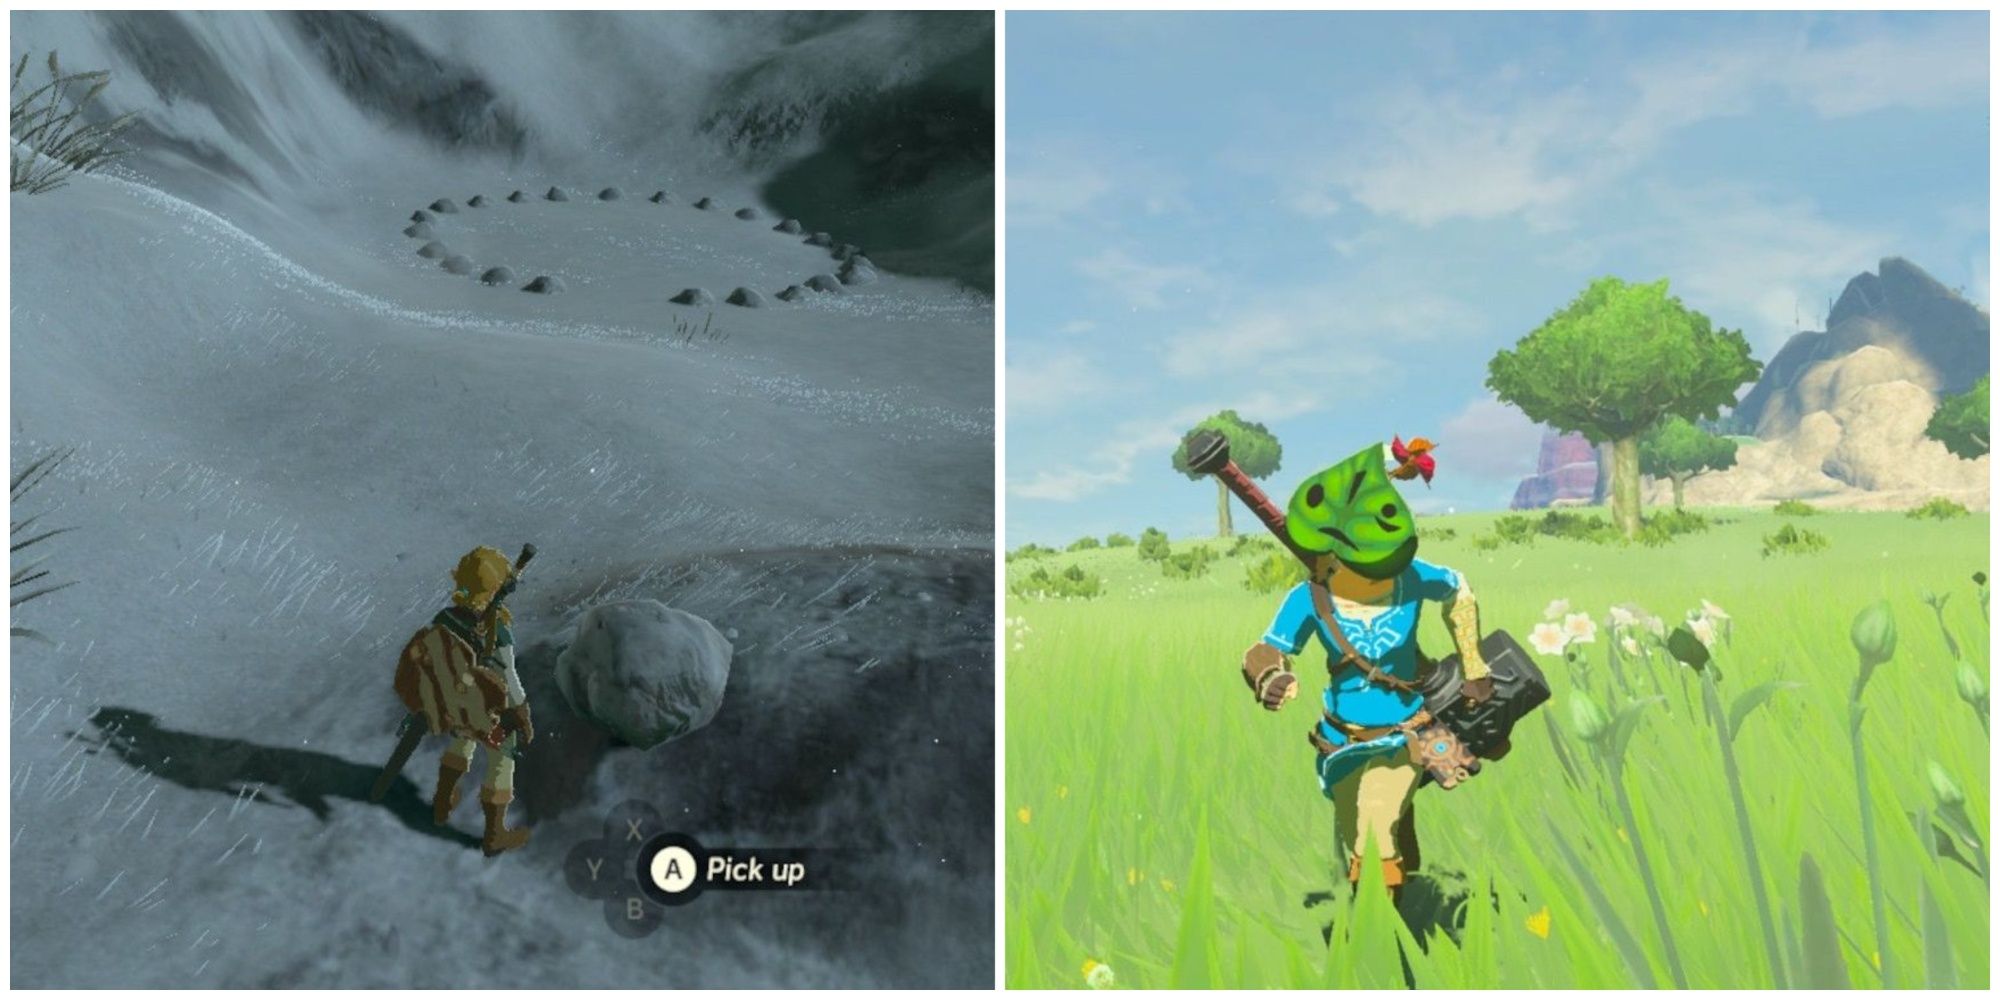 solving korok puzzles and looking for creatures with korok mask on